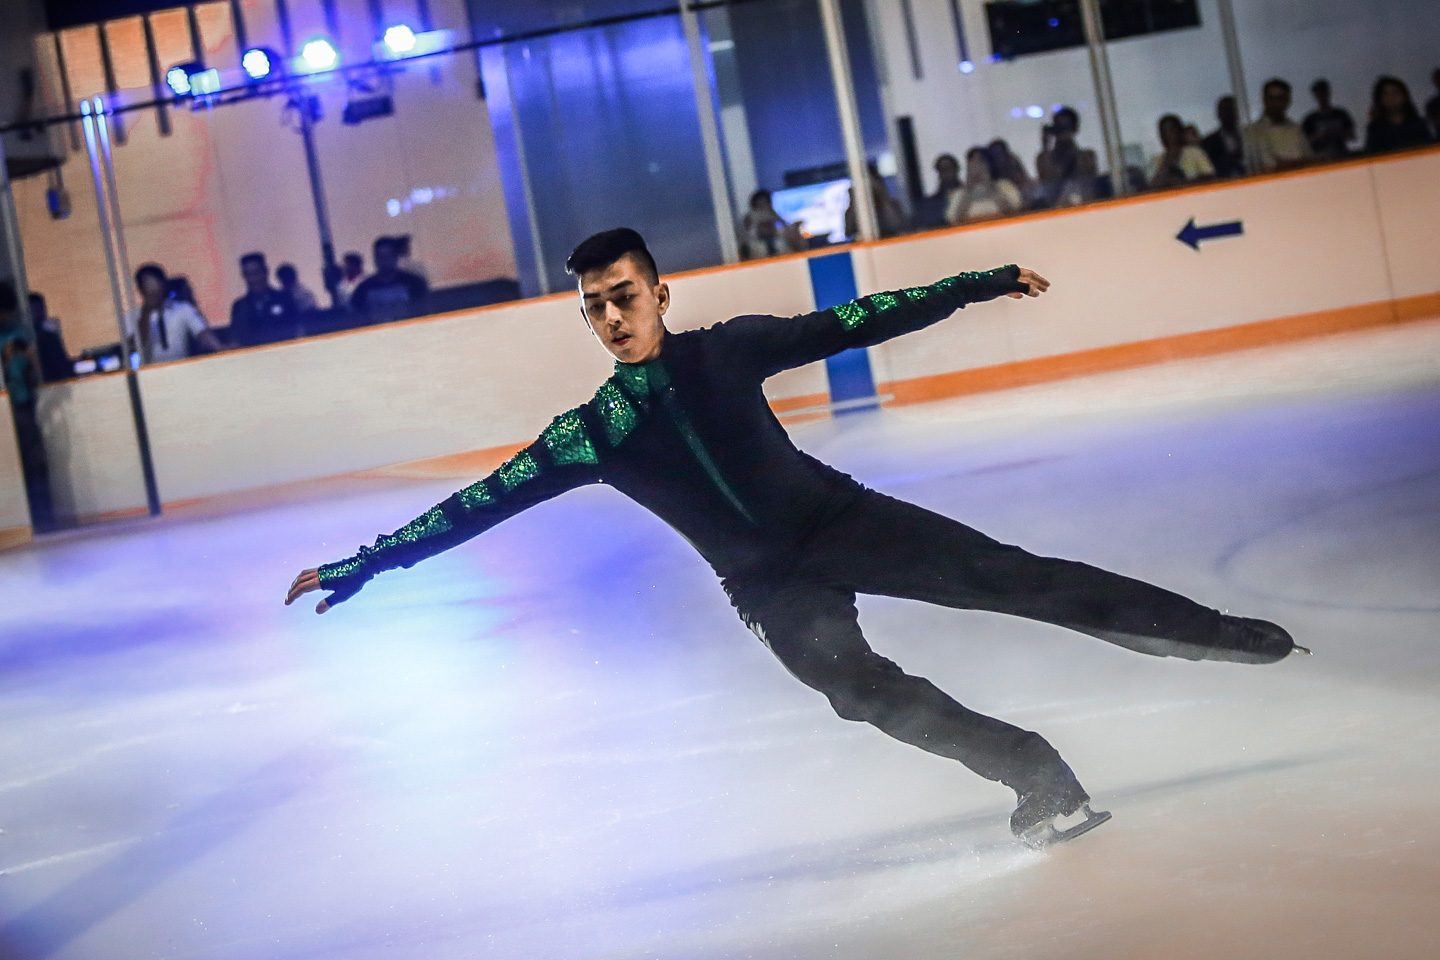 Michael Martinez seeks financial support for 2022 Winter Olympics